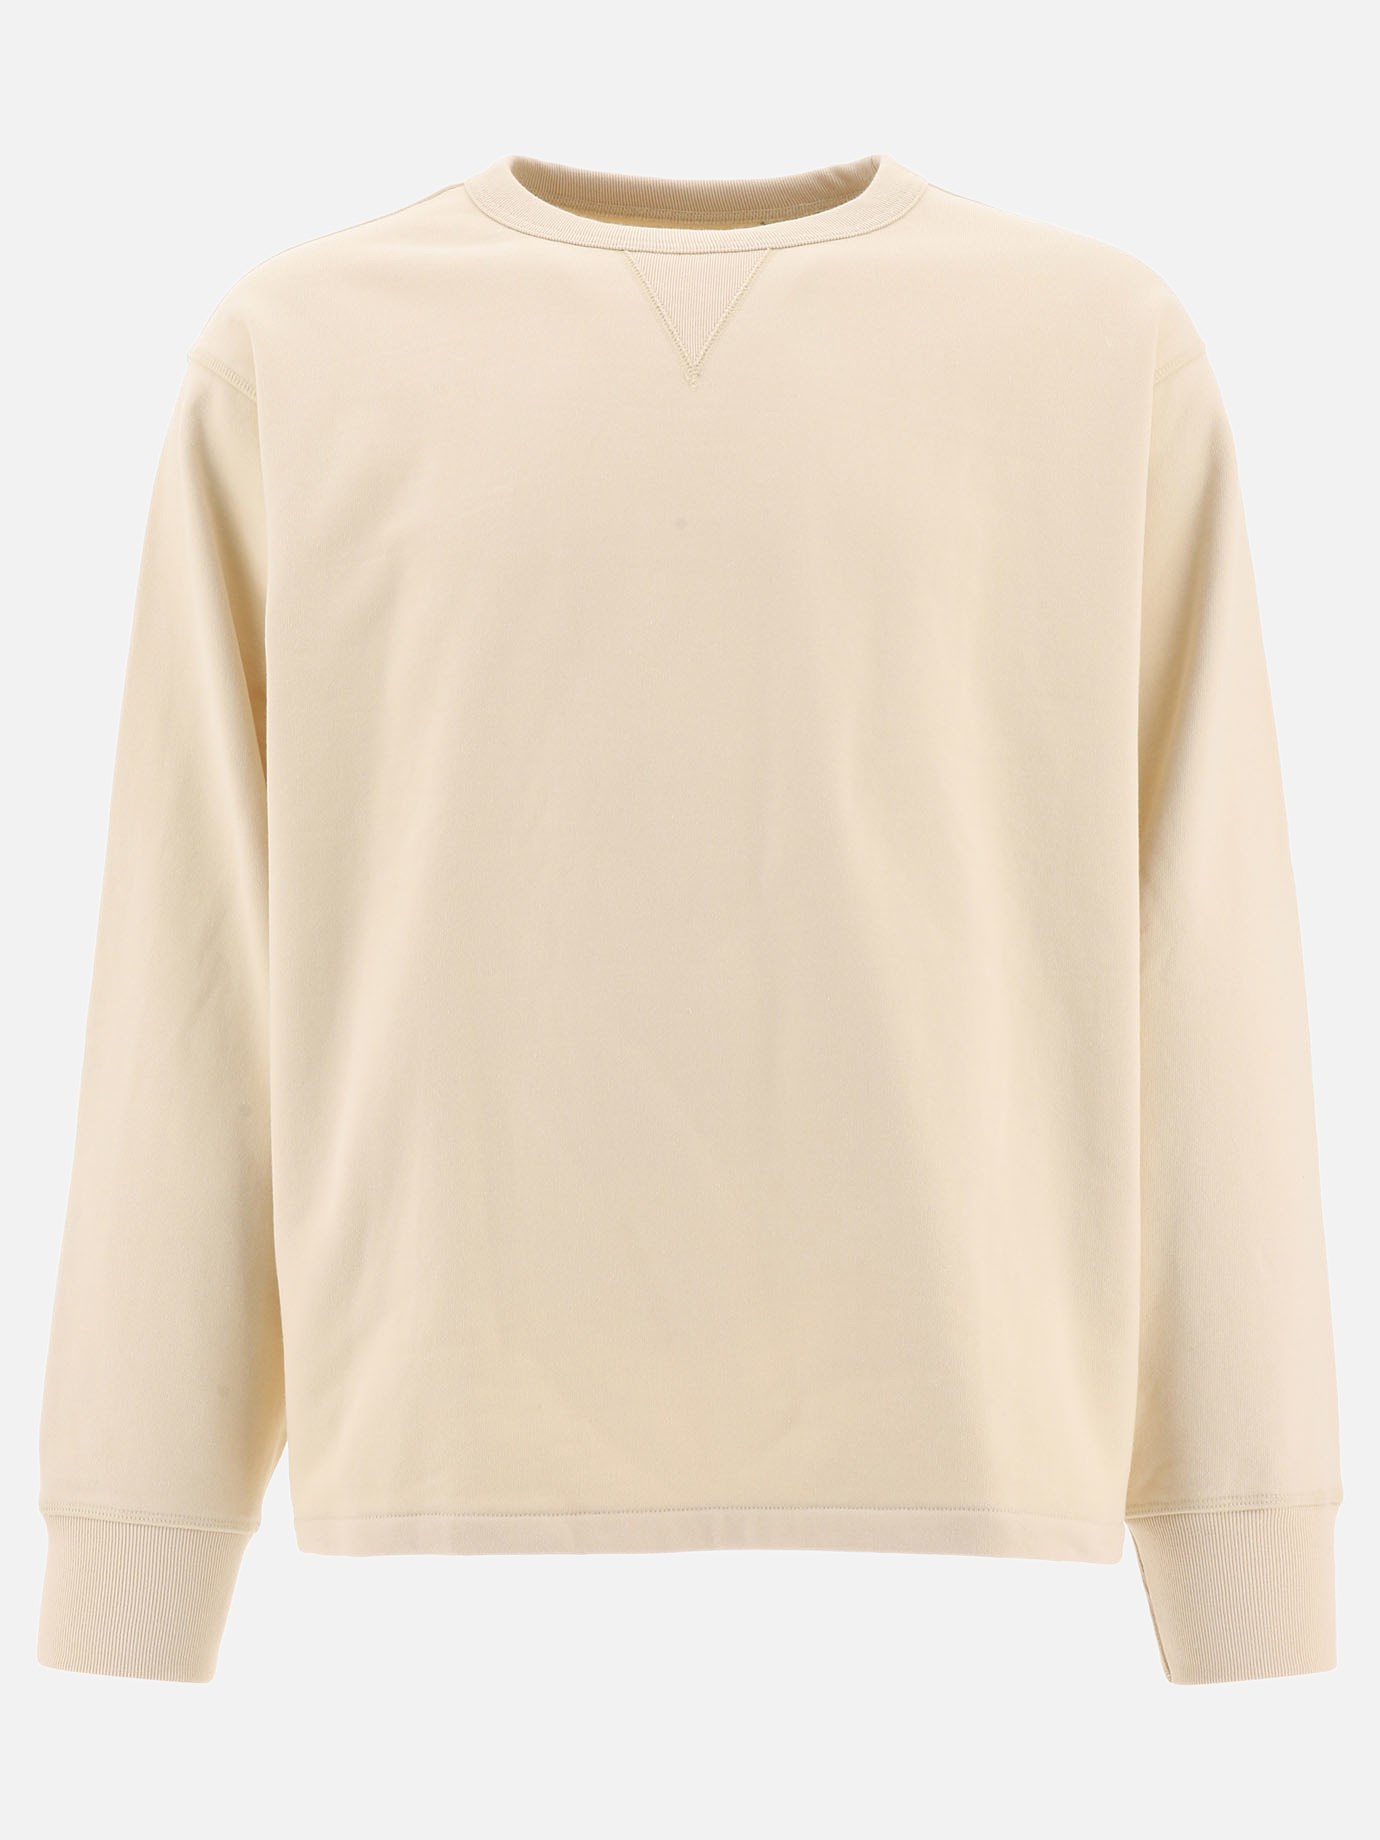  Classic  sweatshirt by Levi's Made & Crafted